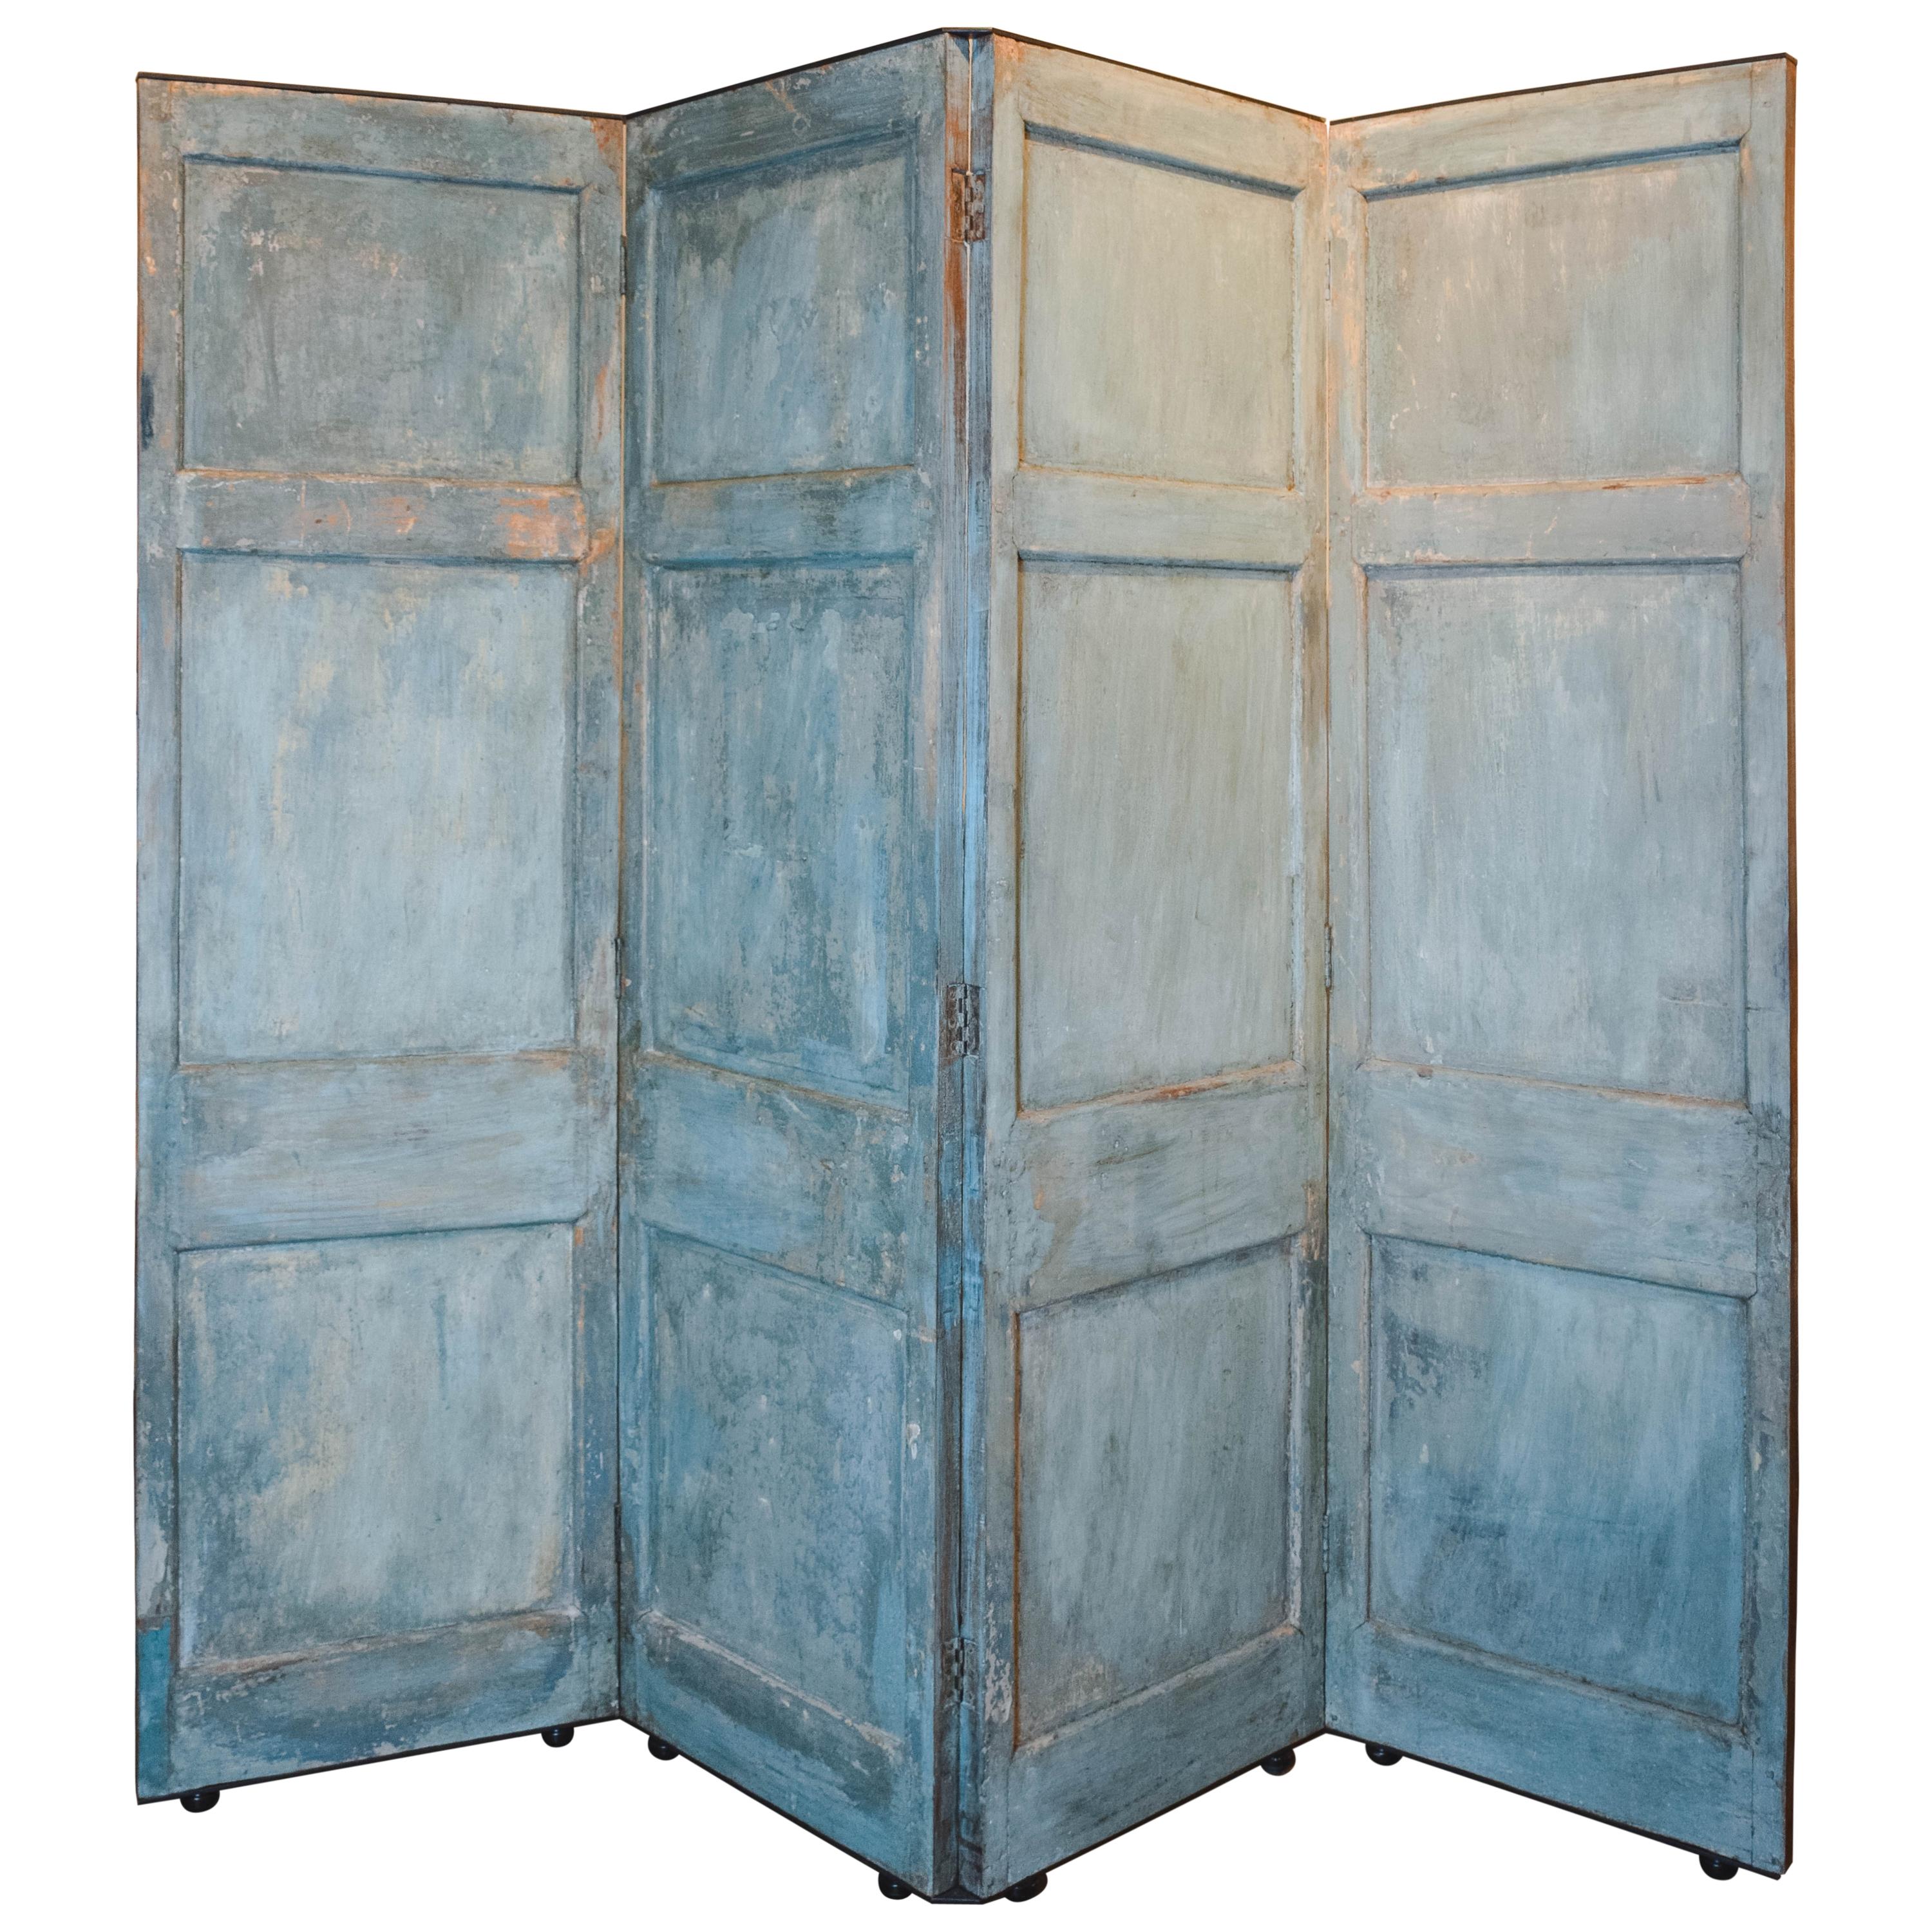 Antique Belgian Screen on Casters